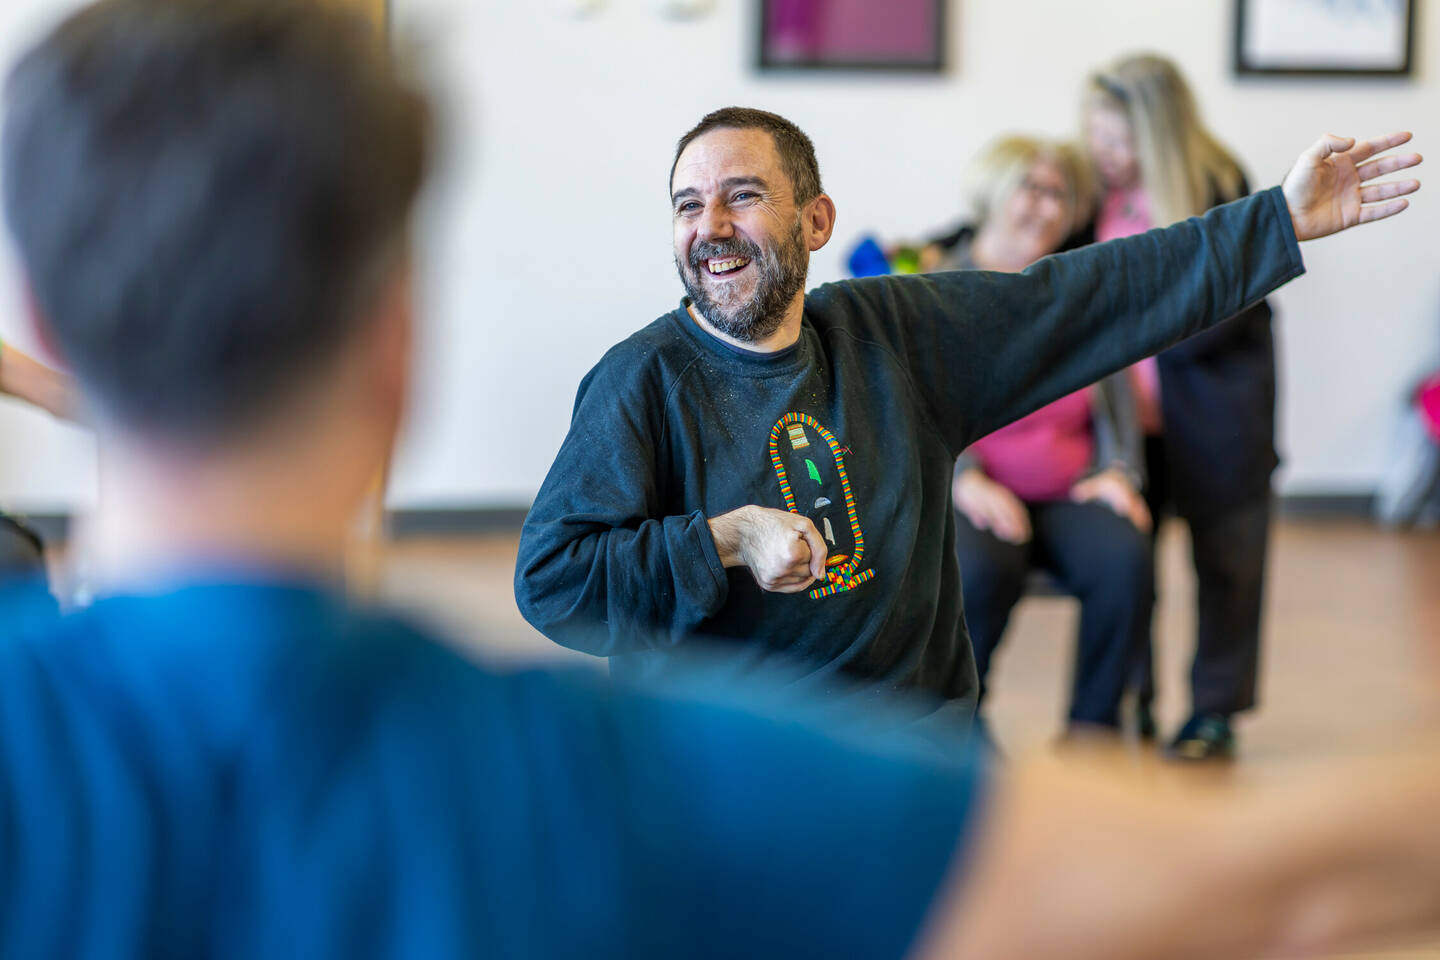 Older disabled man smiling as he takes part in seated exercise class